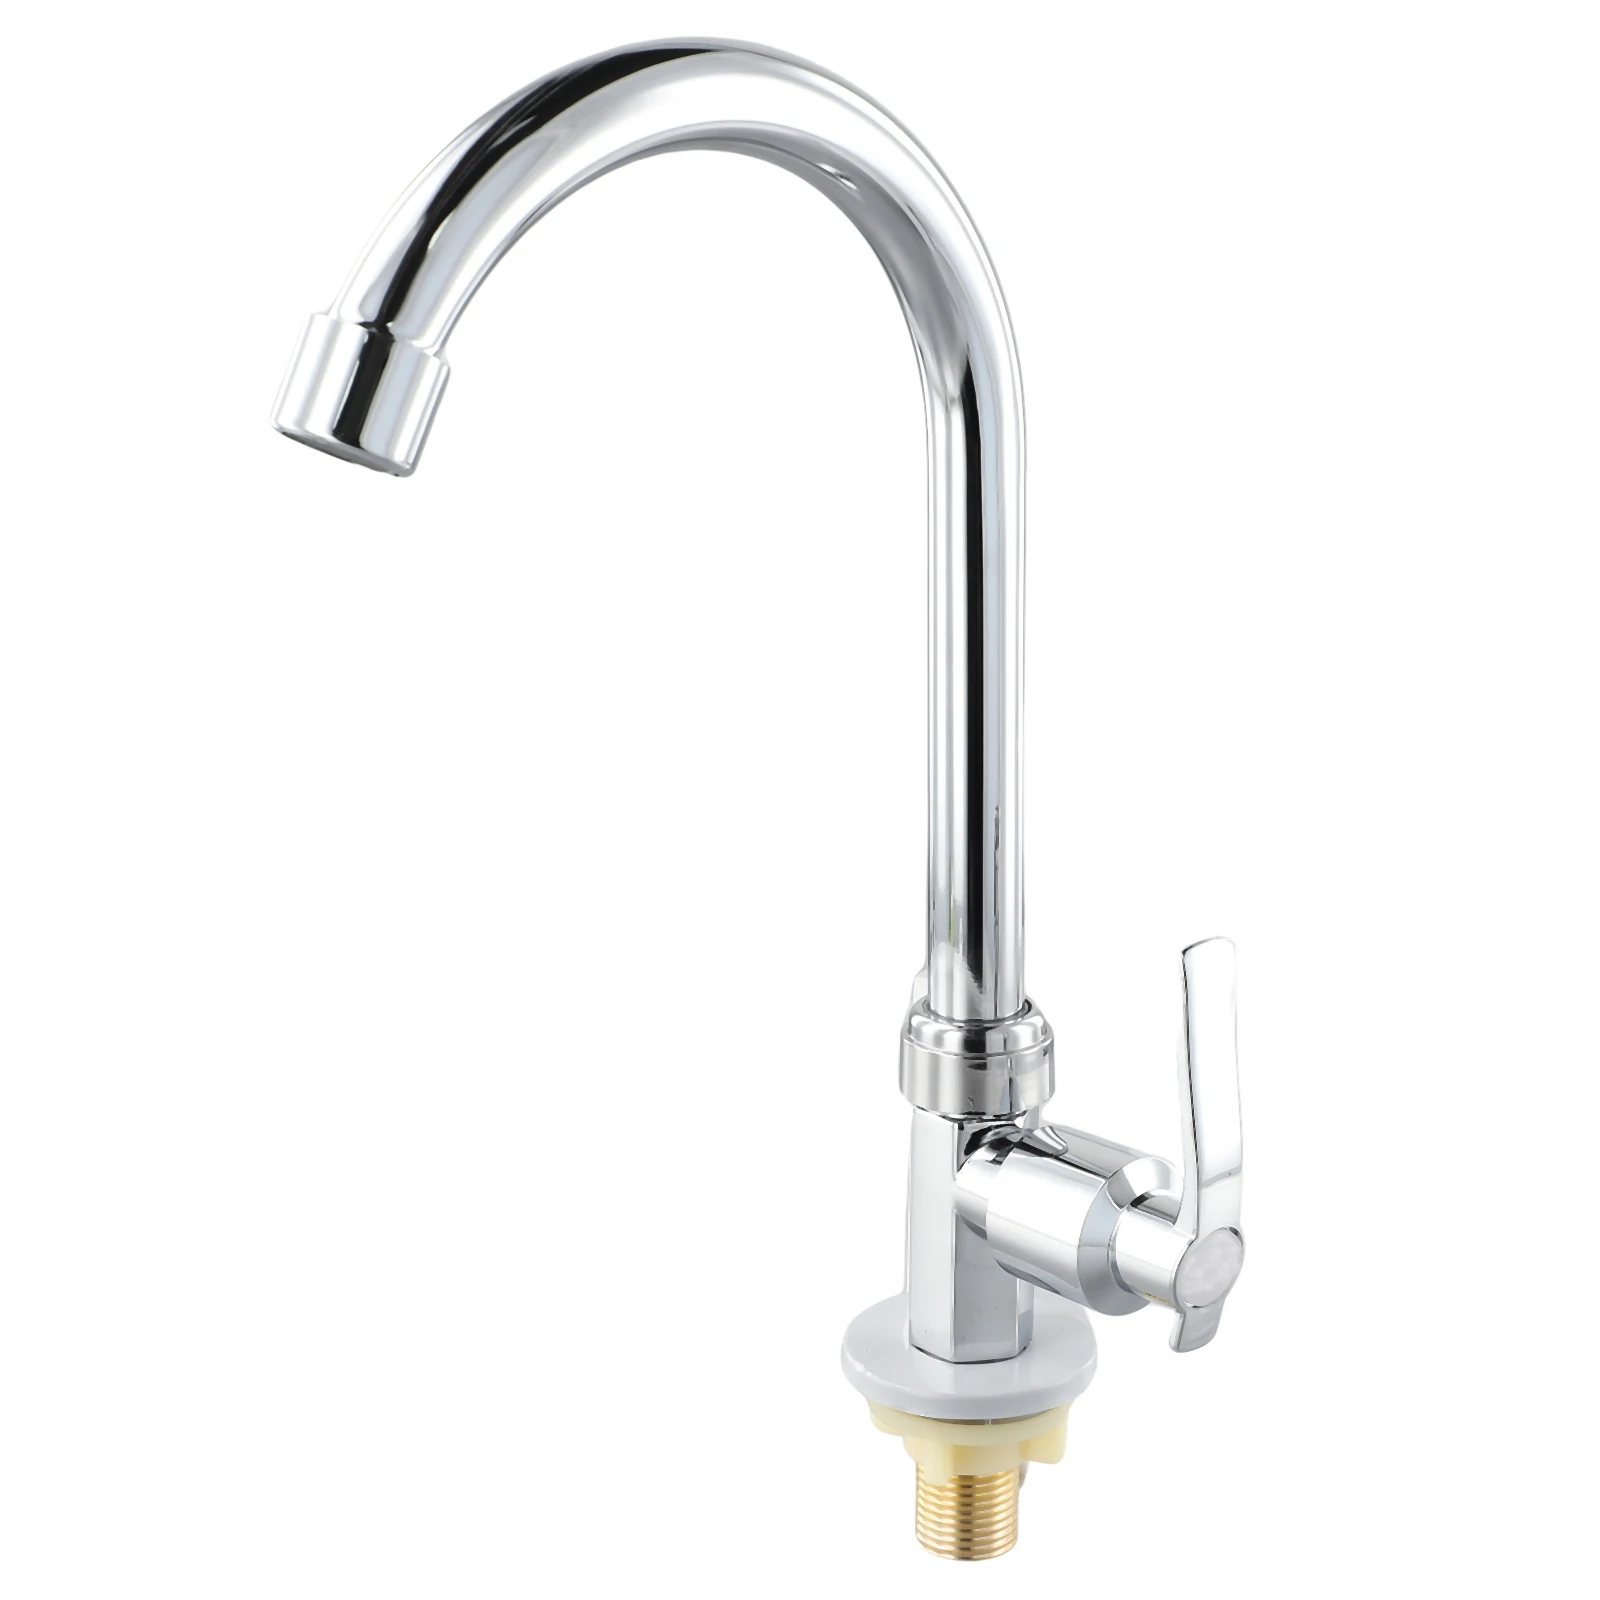 

Kitchen Faucet Stainless Steel Tall Kitchen Faucet Mixer Sink Faucet Pull Out Spray Single Handle Swivel Spout Mixer Taps